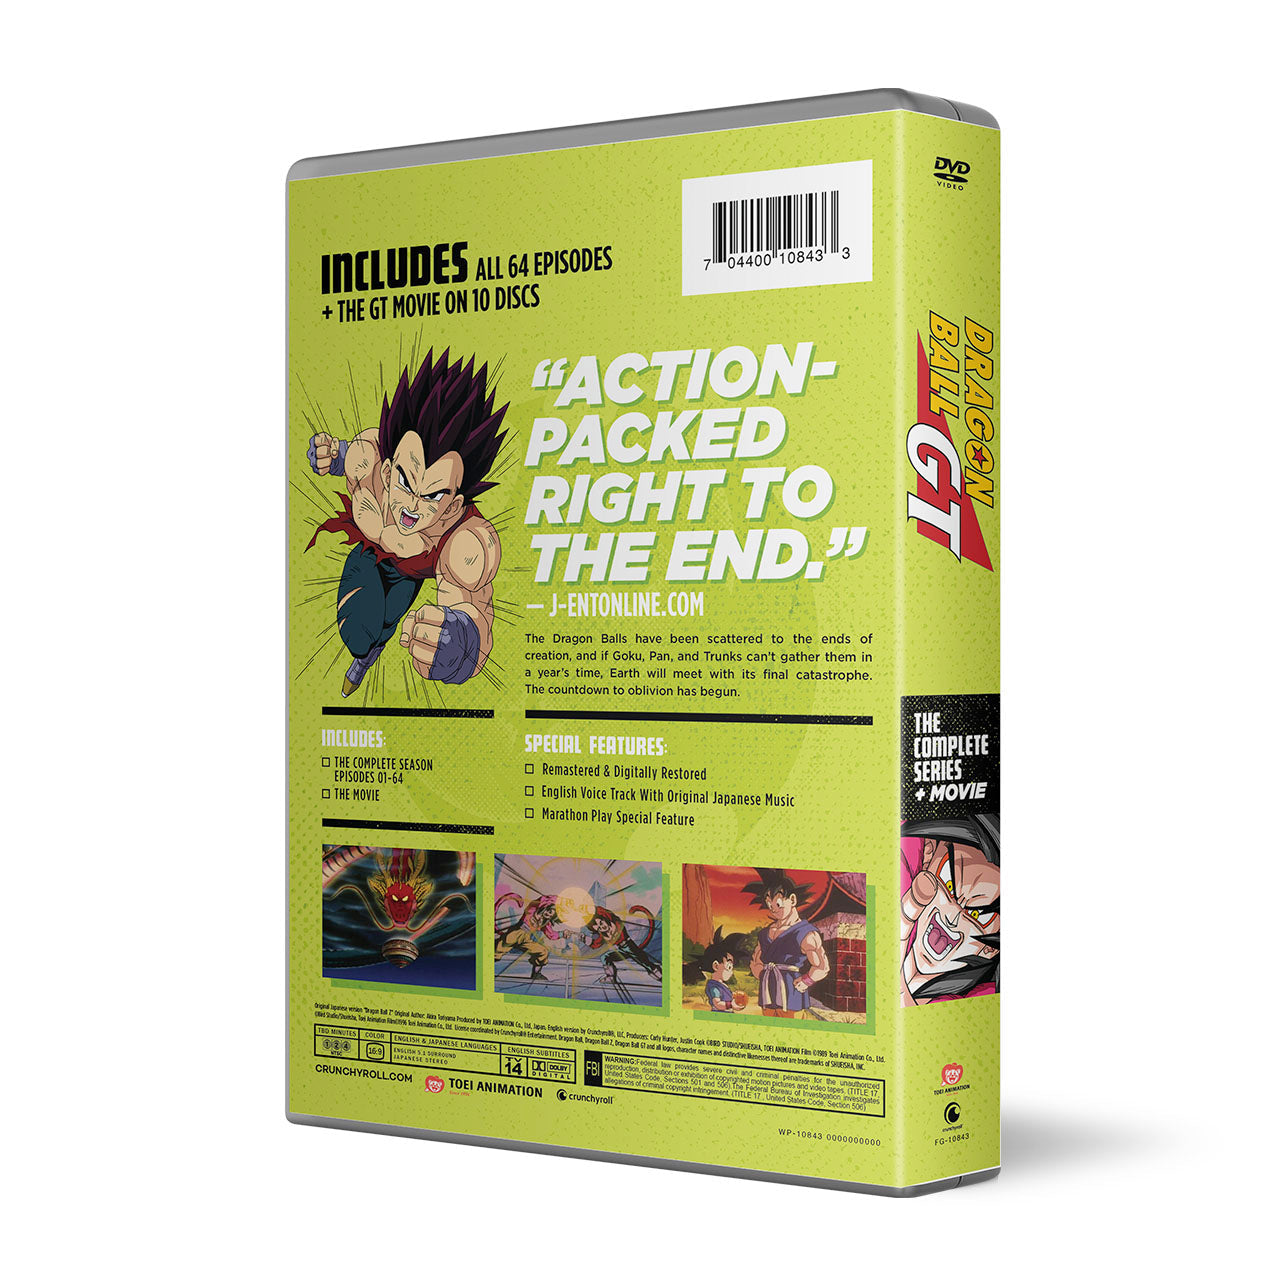 Dragon Ball GT - The Complete Series - DVD image count 1